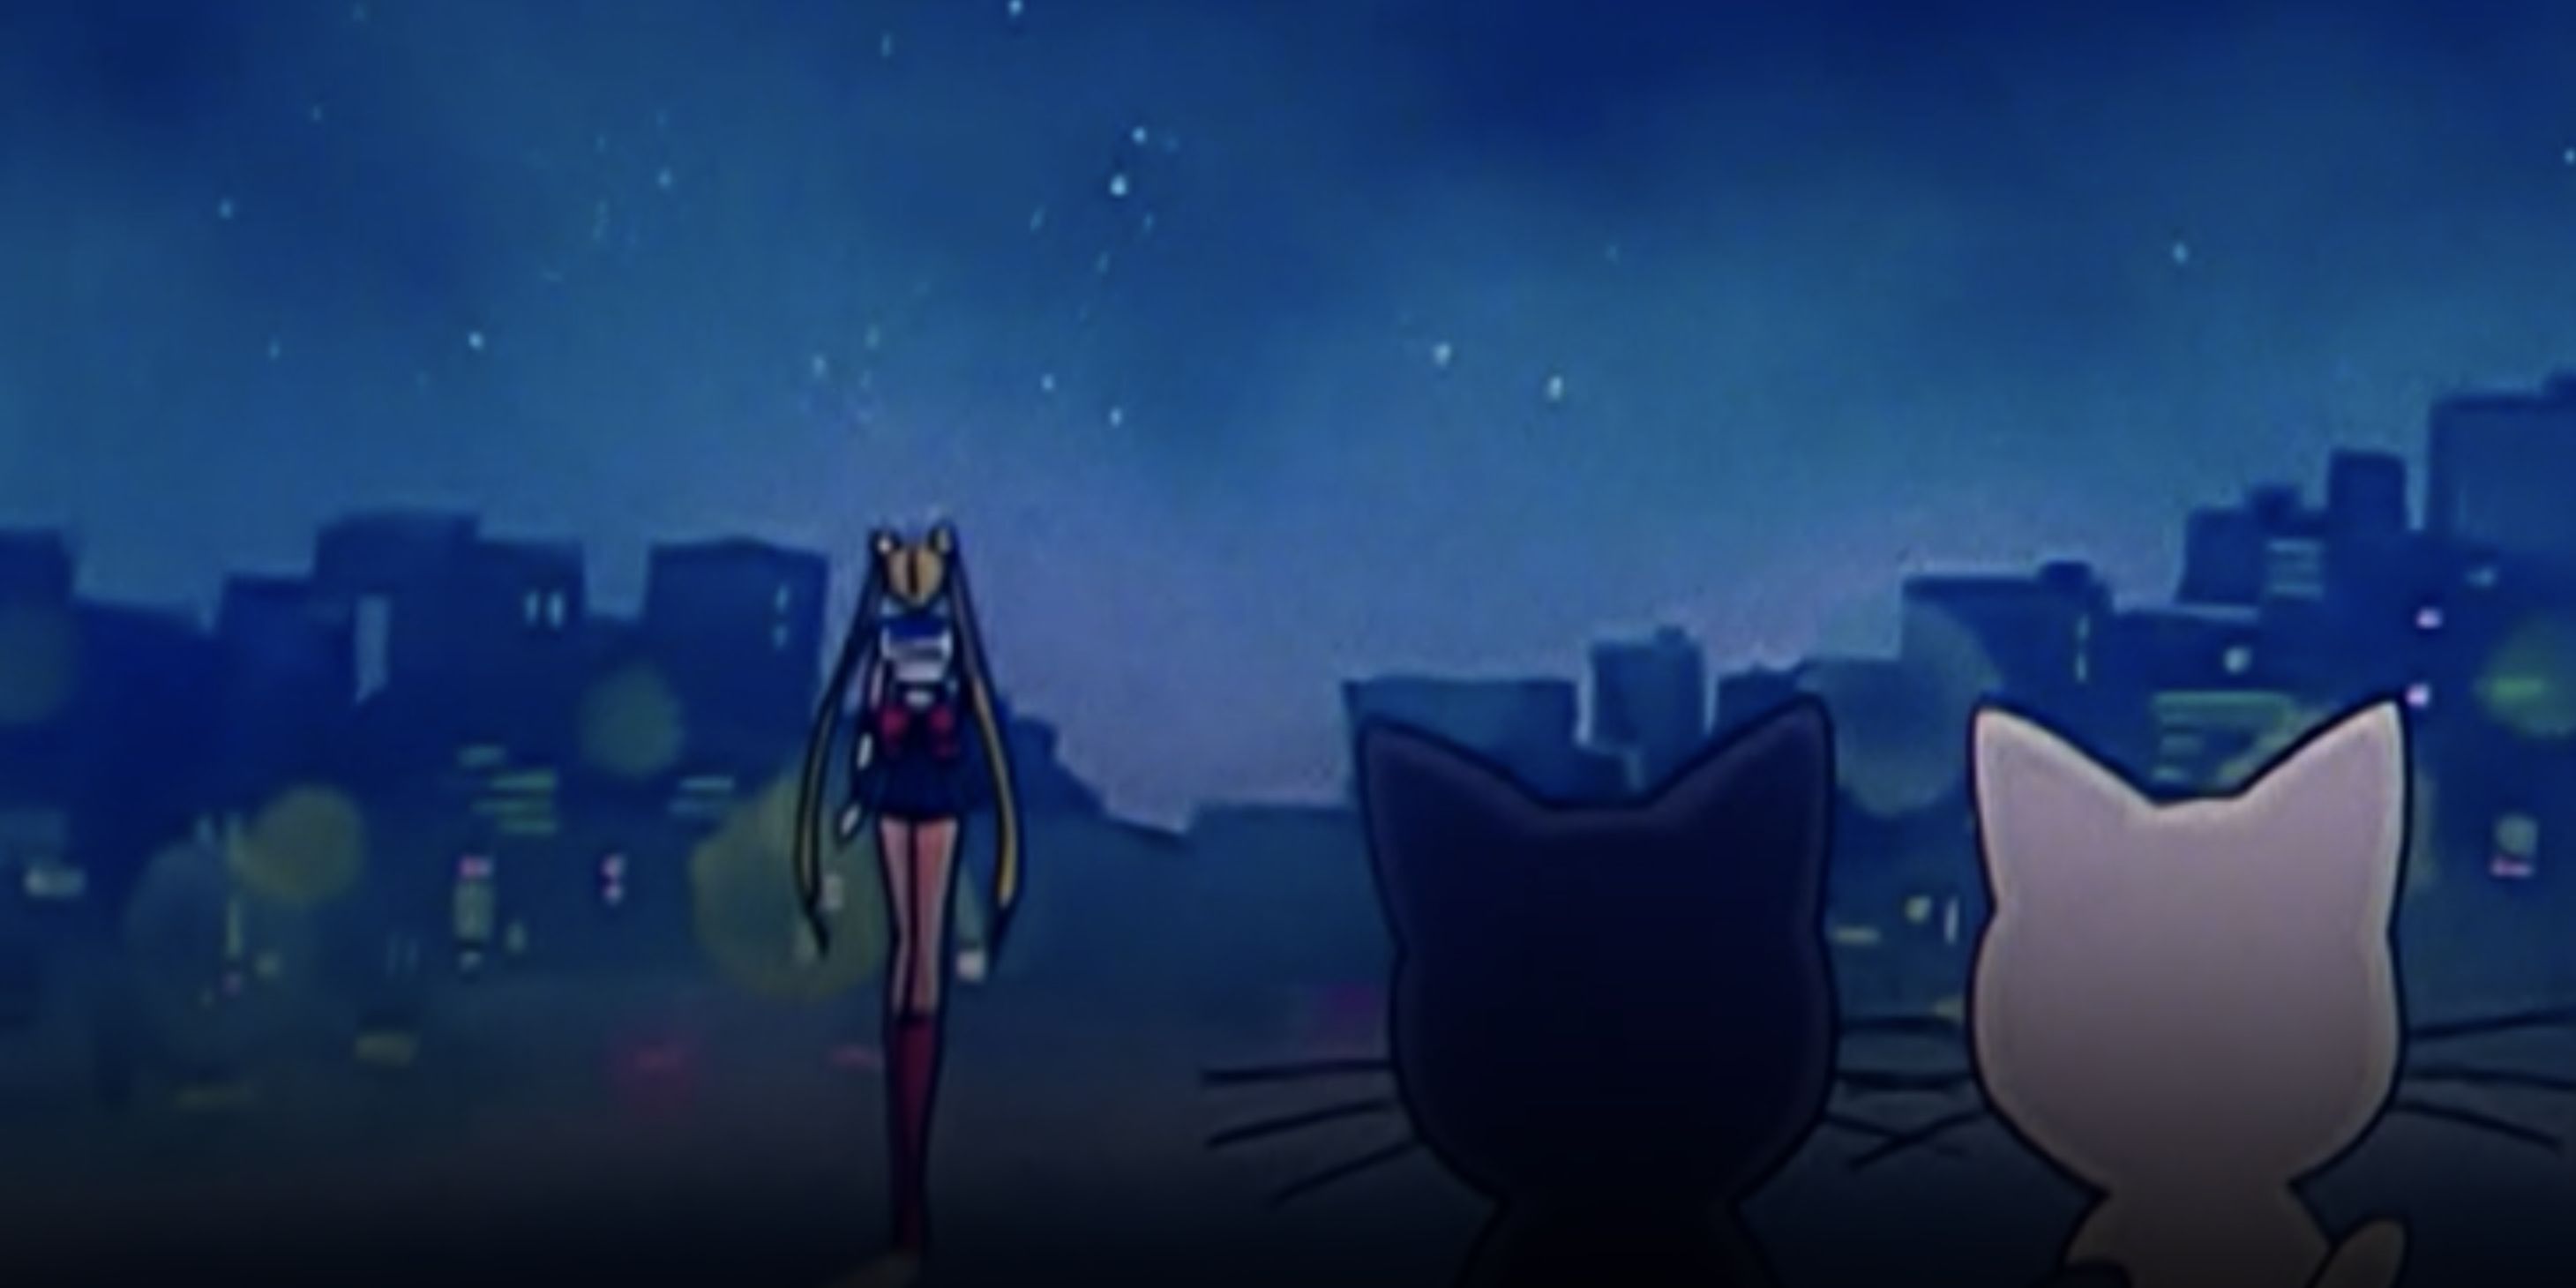 Sailor Moon looking into the night sky with Luna and Artemis behind her